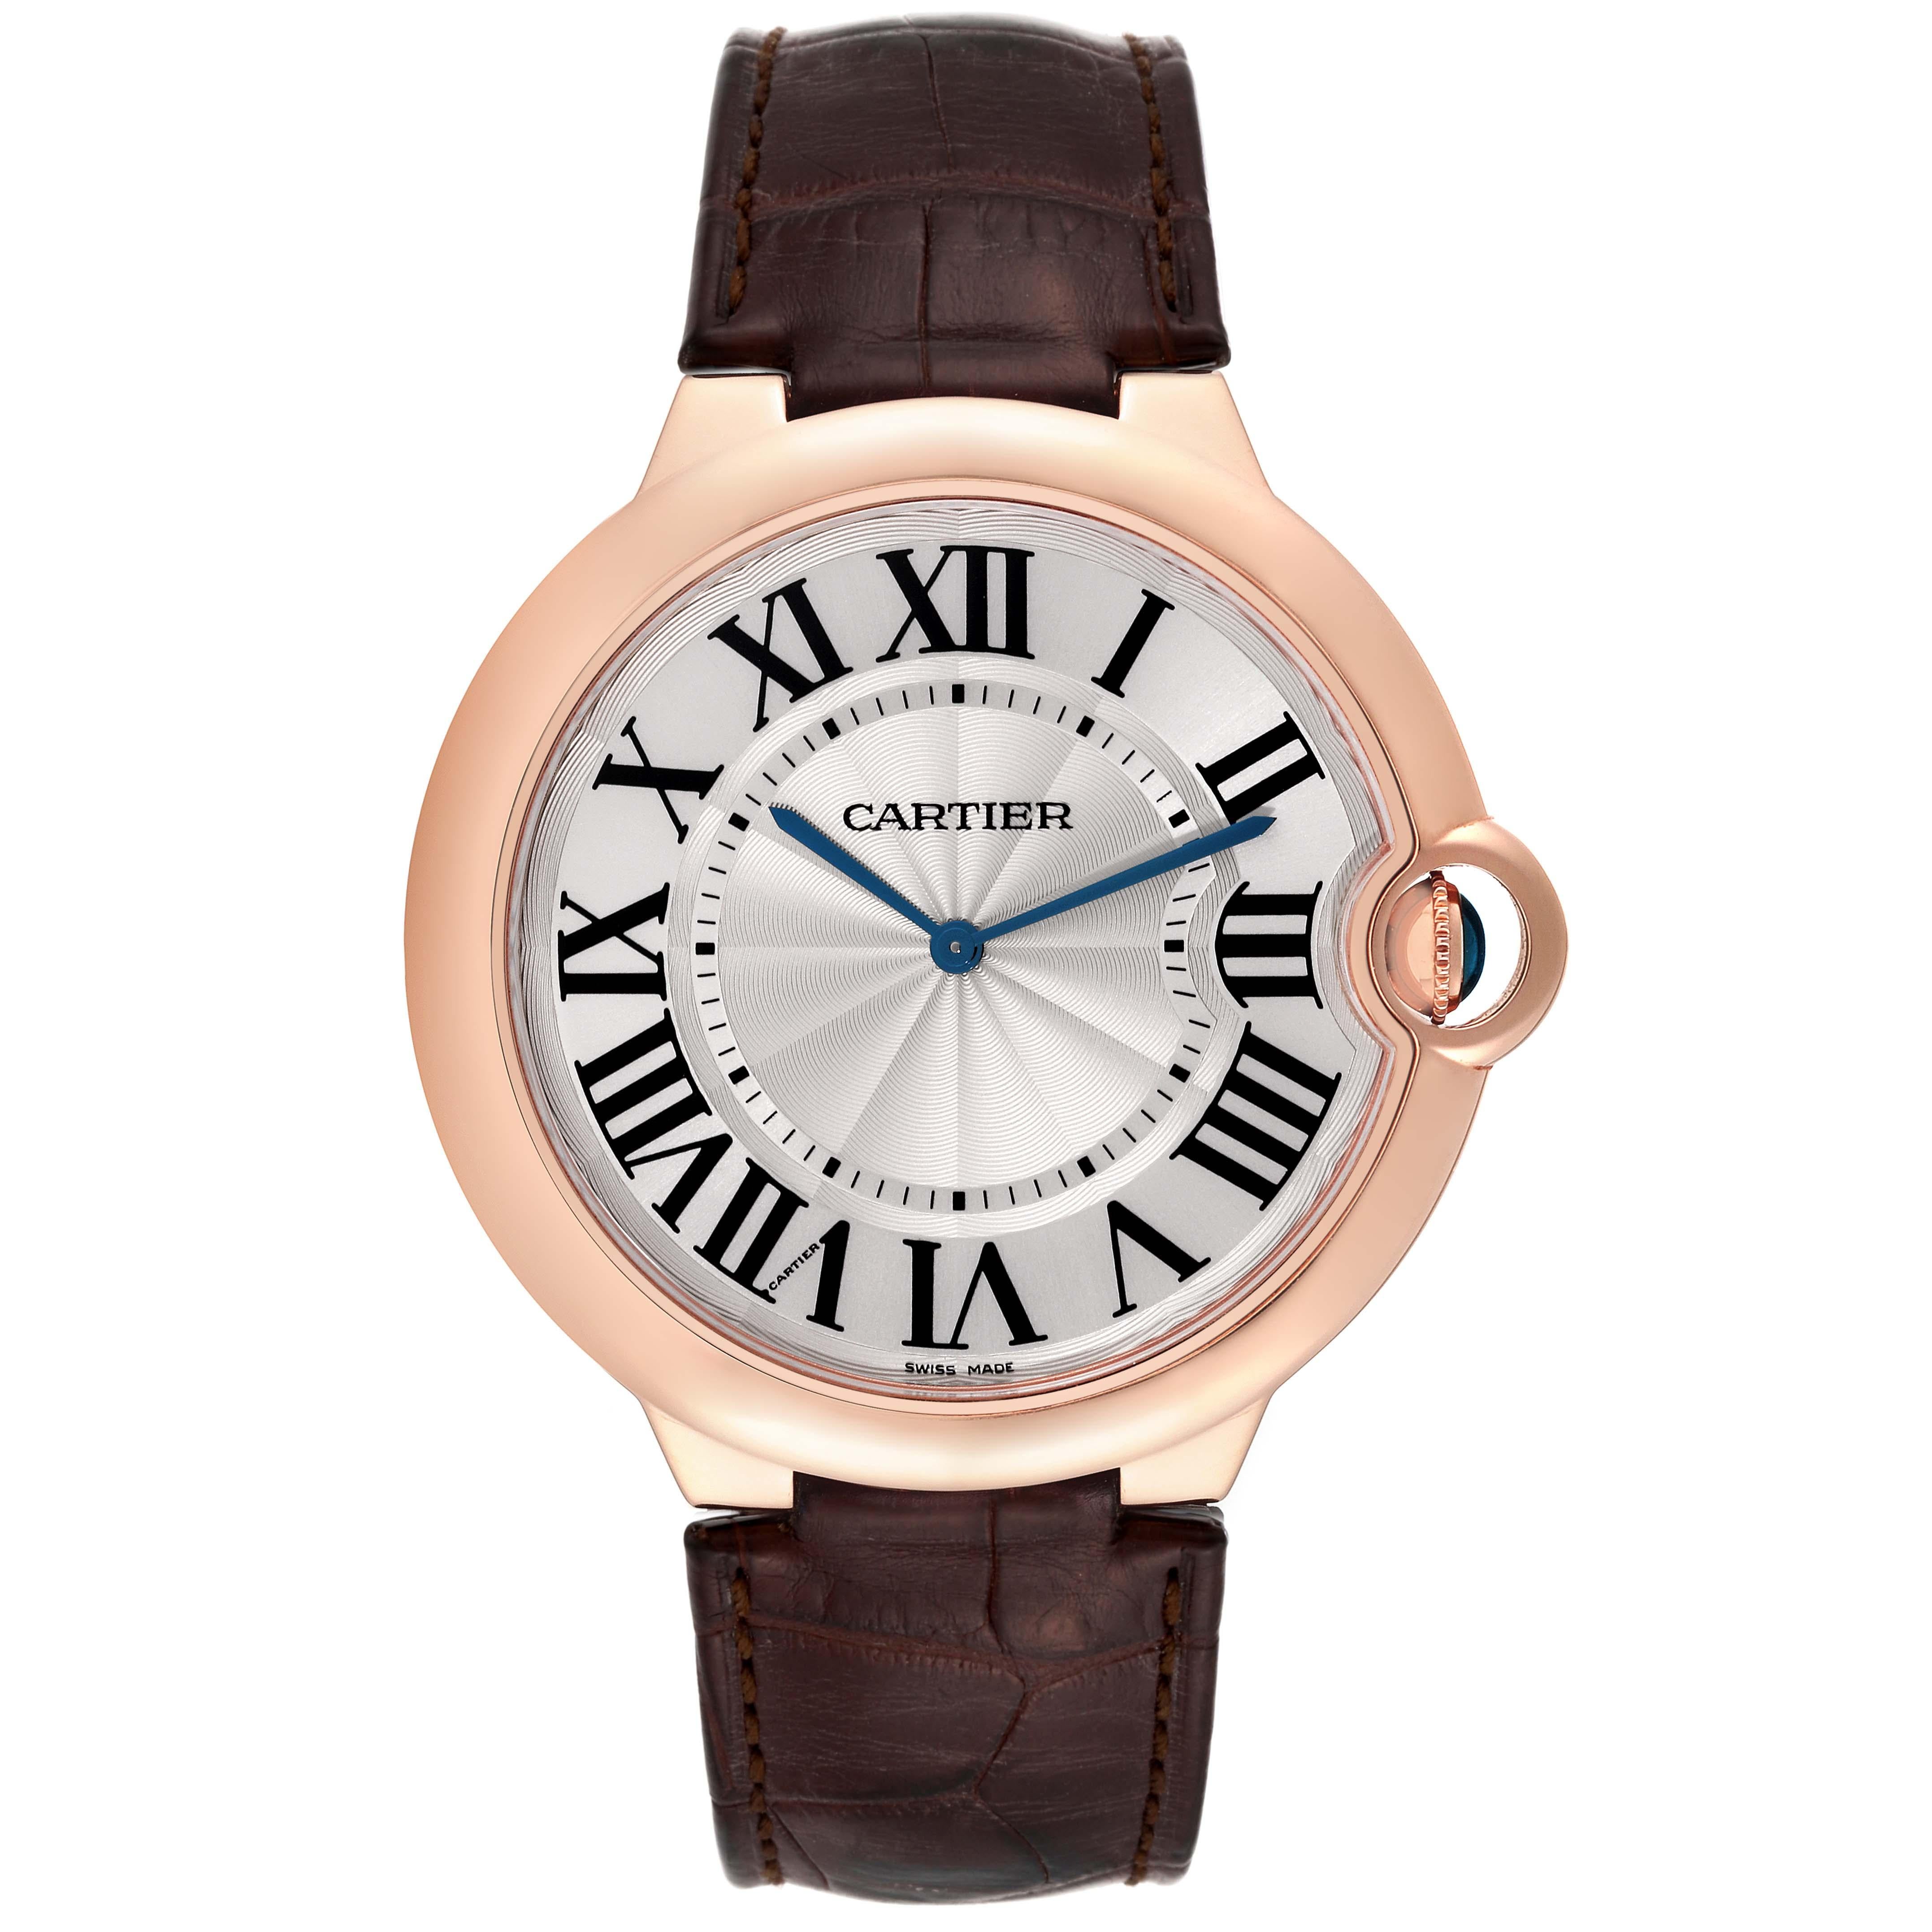 Cartier Ballon Bleu Ultra Thin 46 mm Rose Gold Mens Watch W6920054. Manual winding movement. 18K rose gold case 46.0 mm in diameter, 6.9 mm thick. Fluted crown set with the blue sapphire cabochon. Smooth 18K rose gold bezel. Scratch resistant